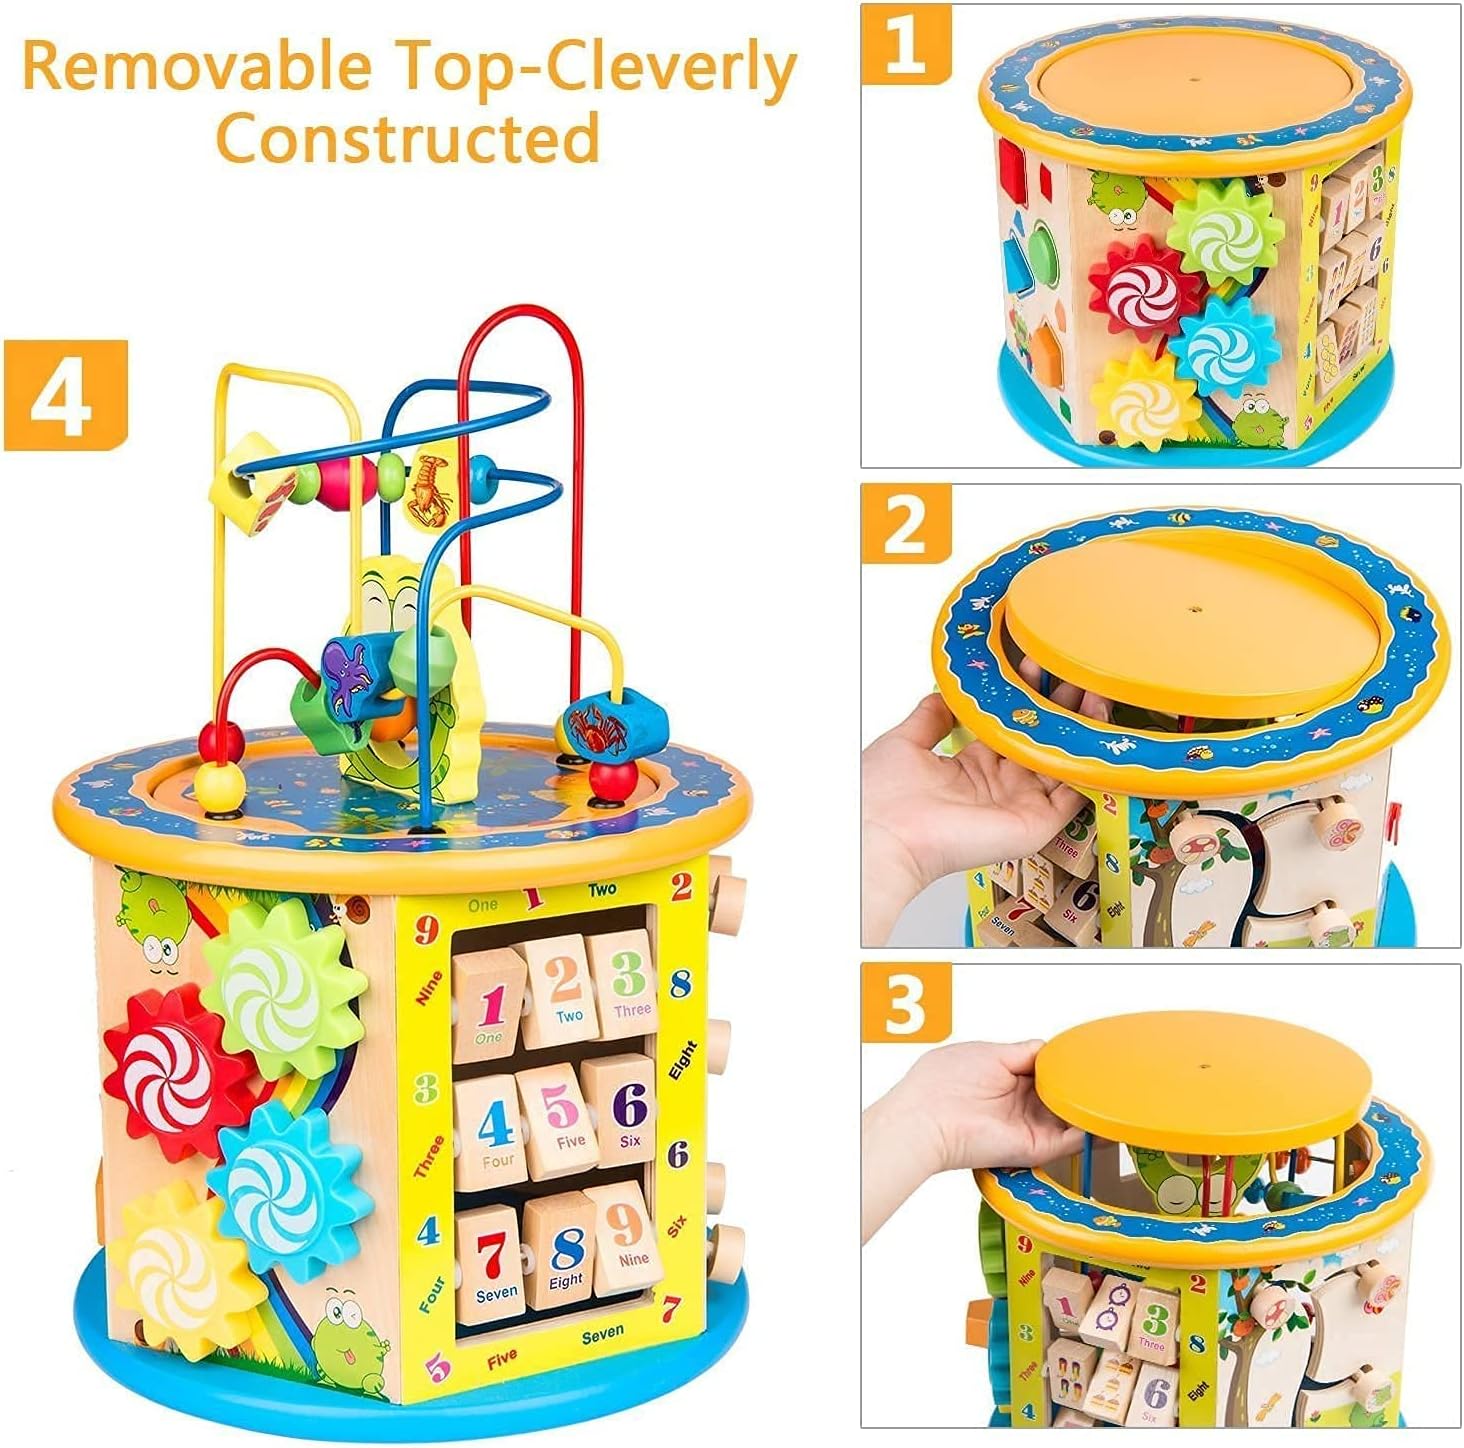 Womdee Activity Cube Toys for Kids Wooden 8-in-1 Activity Blocks Educational Bead Maze Toys Boys Girls Activity Center Large